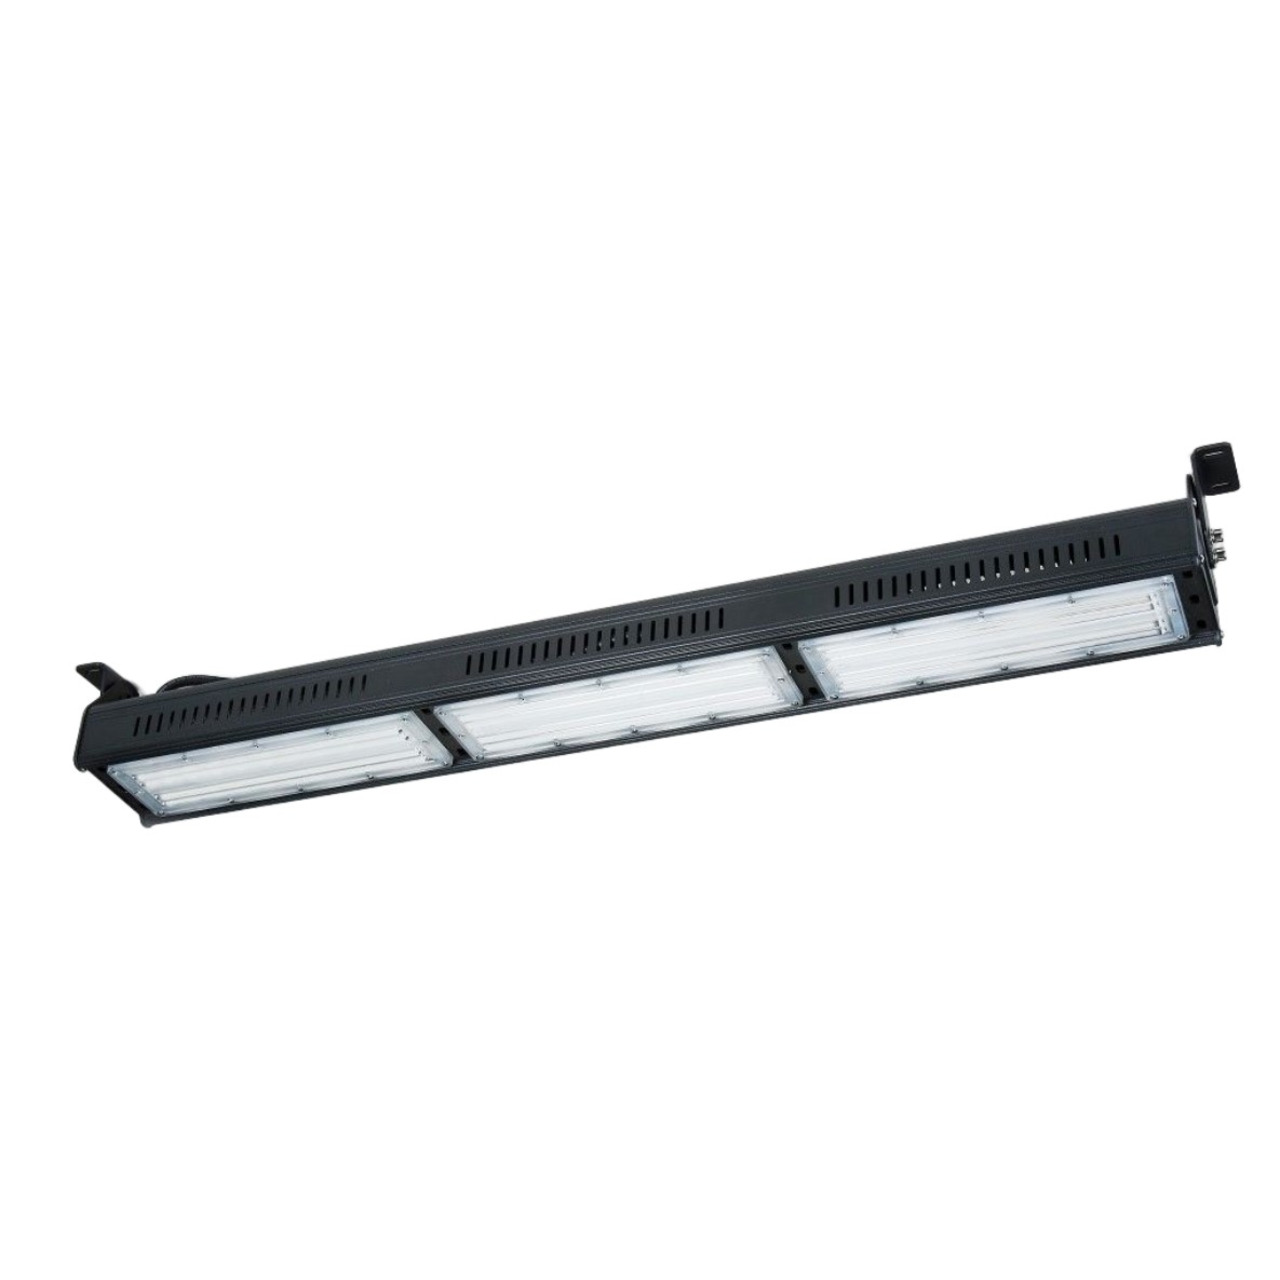 ENOVALITE 150-W-LED-Strahler Linear-HighBay 150- 18000 lm- 120 lm-W- 5000 K- neutralweiss- IP65 unter Beleuchtung